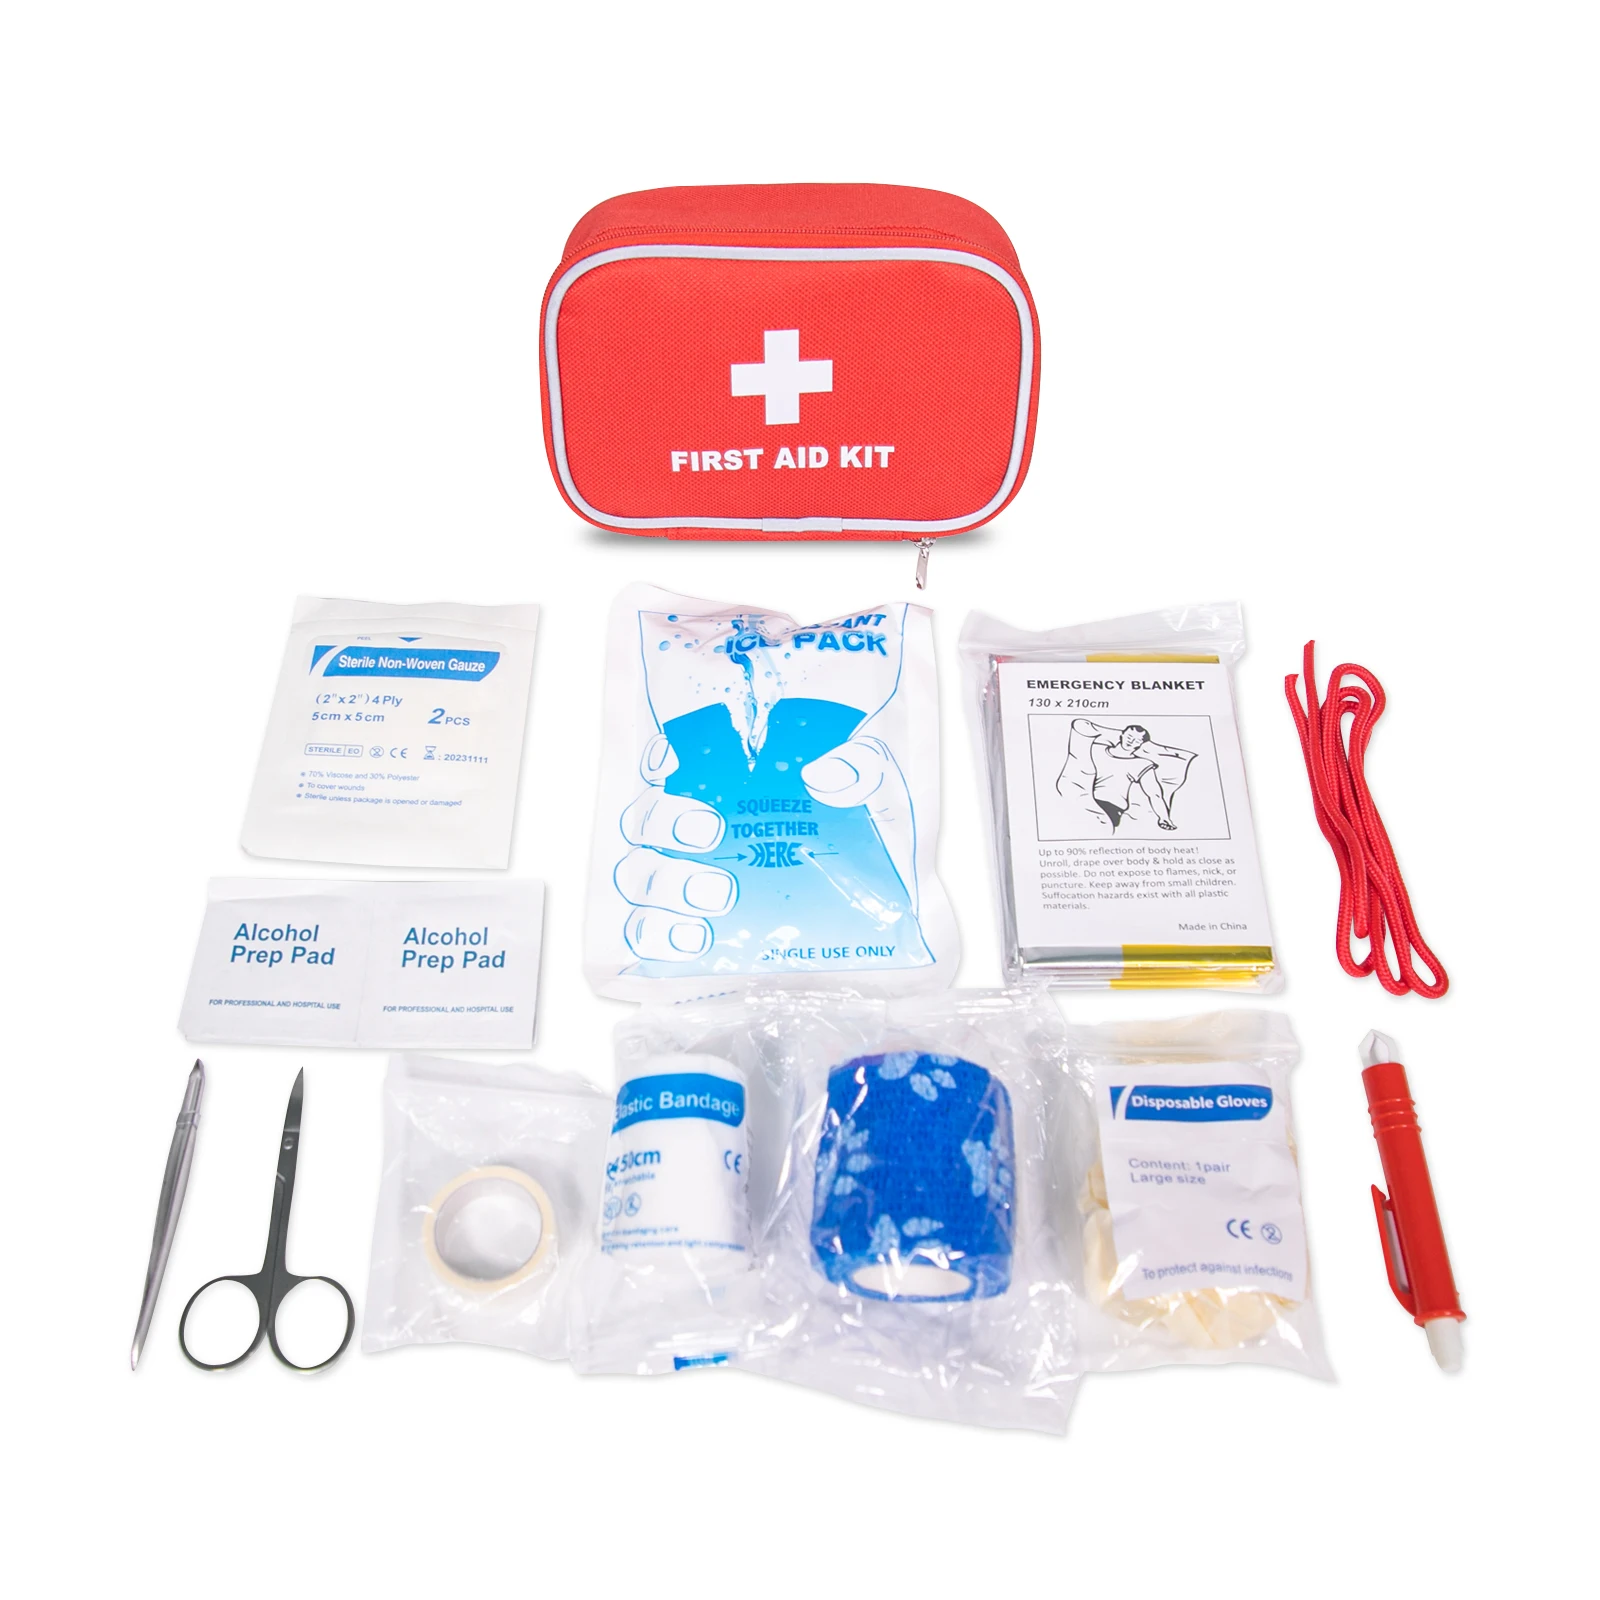 Amazon Hot Sale Customized Compact Pet Medical First Aid Kit for Outdoor Home